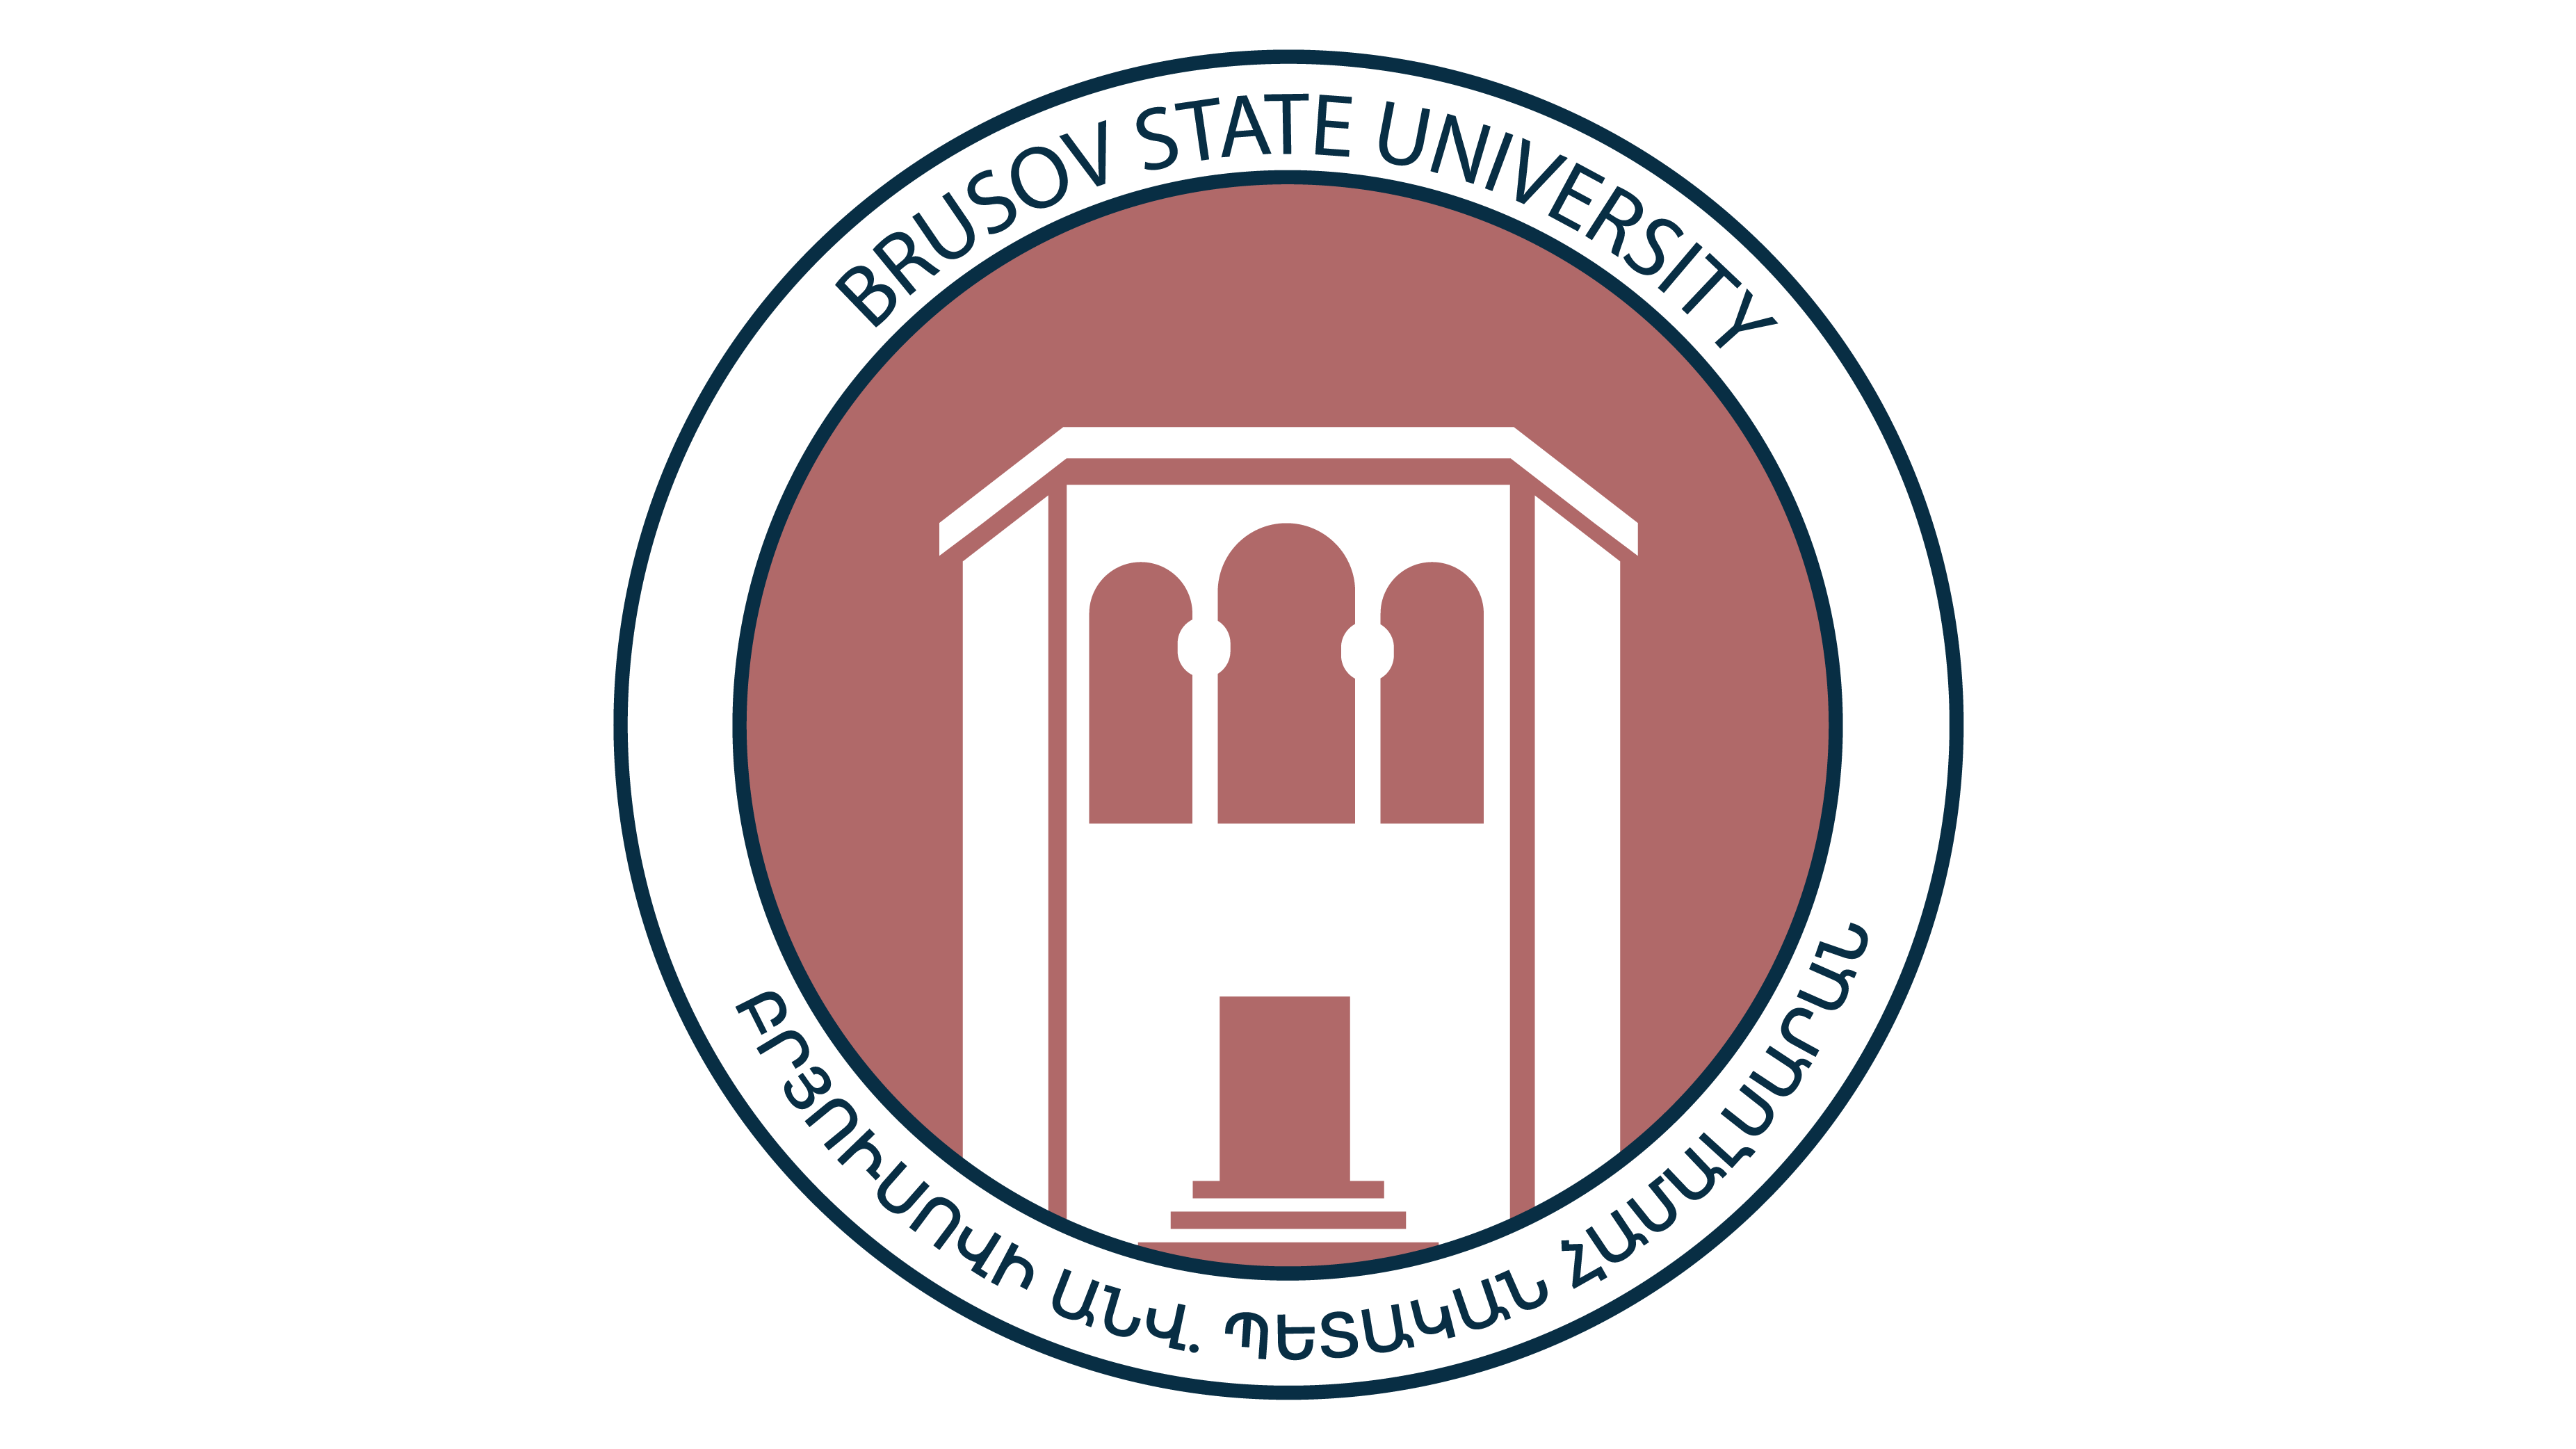 4614-bsulogo16x9.png